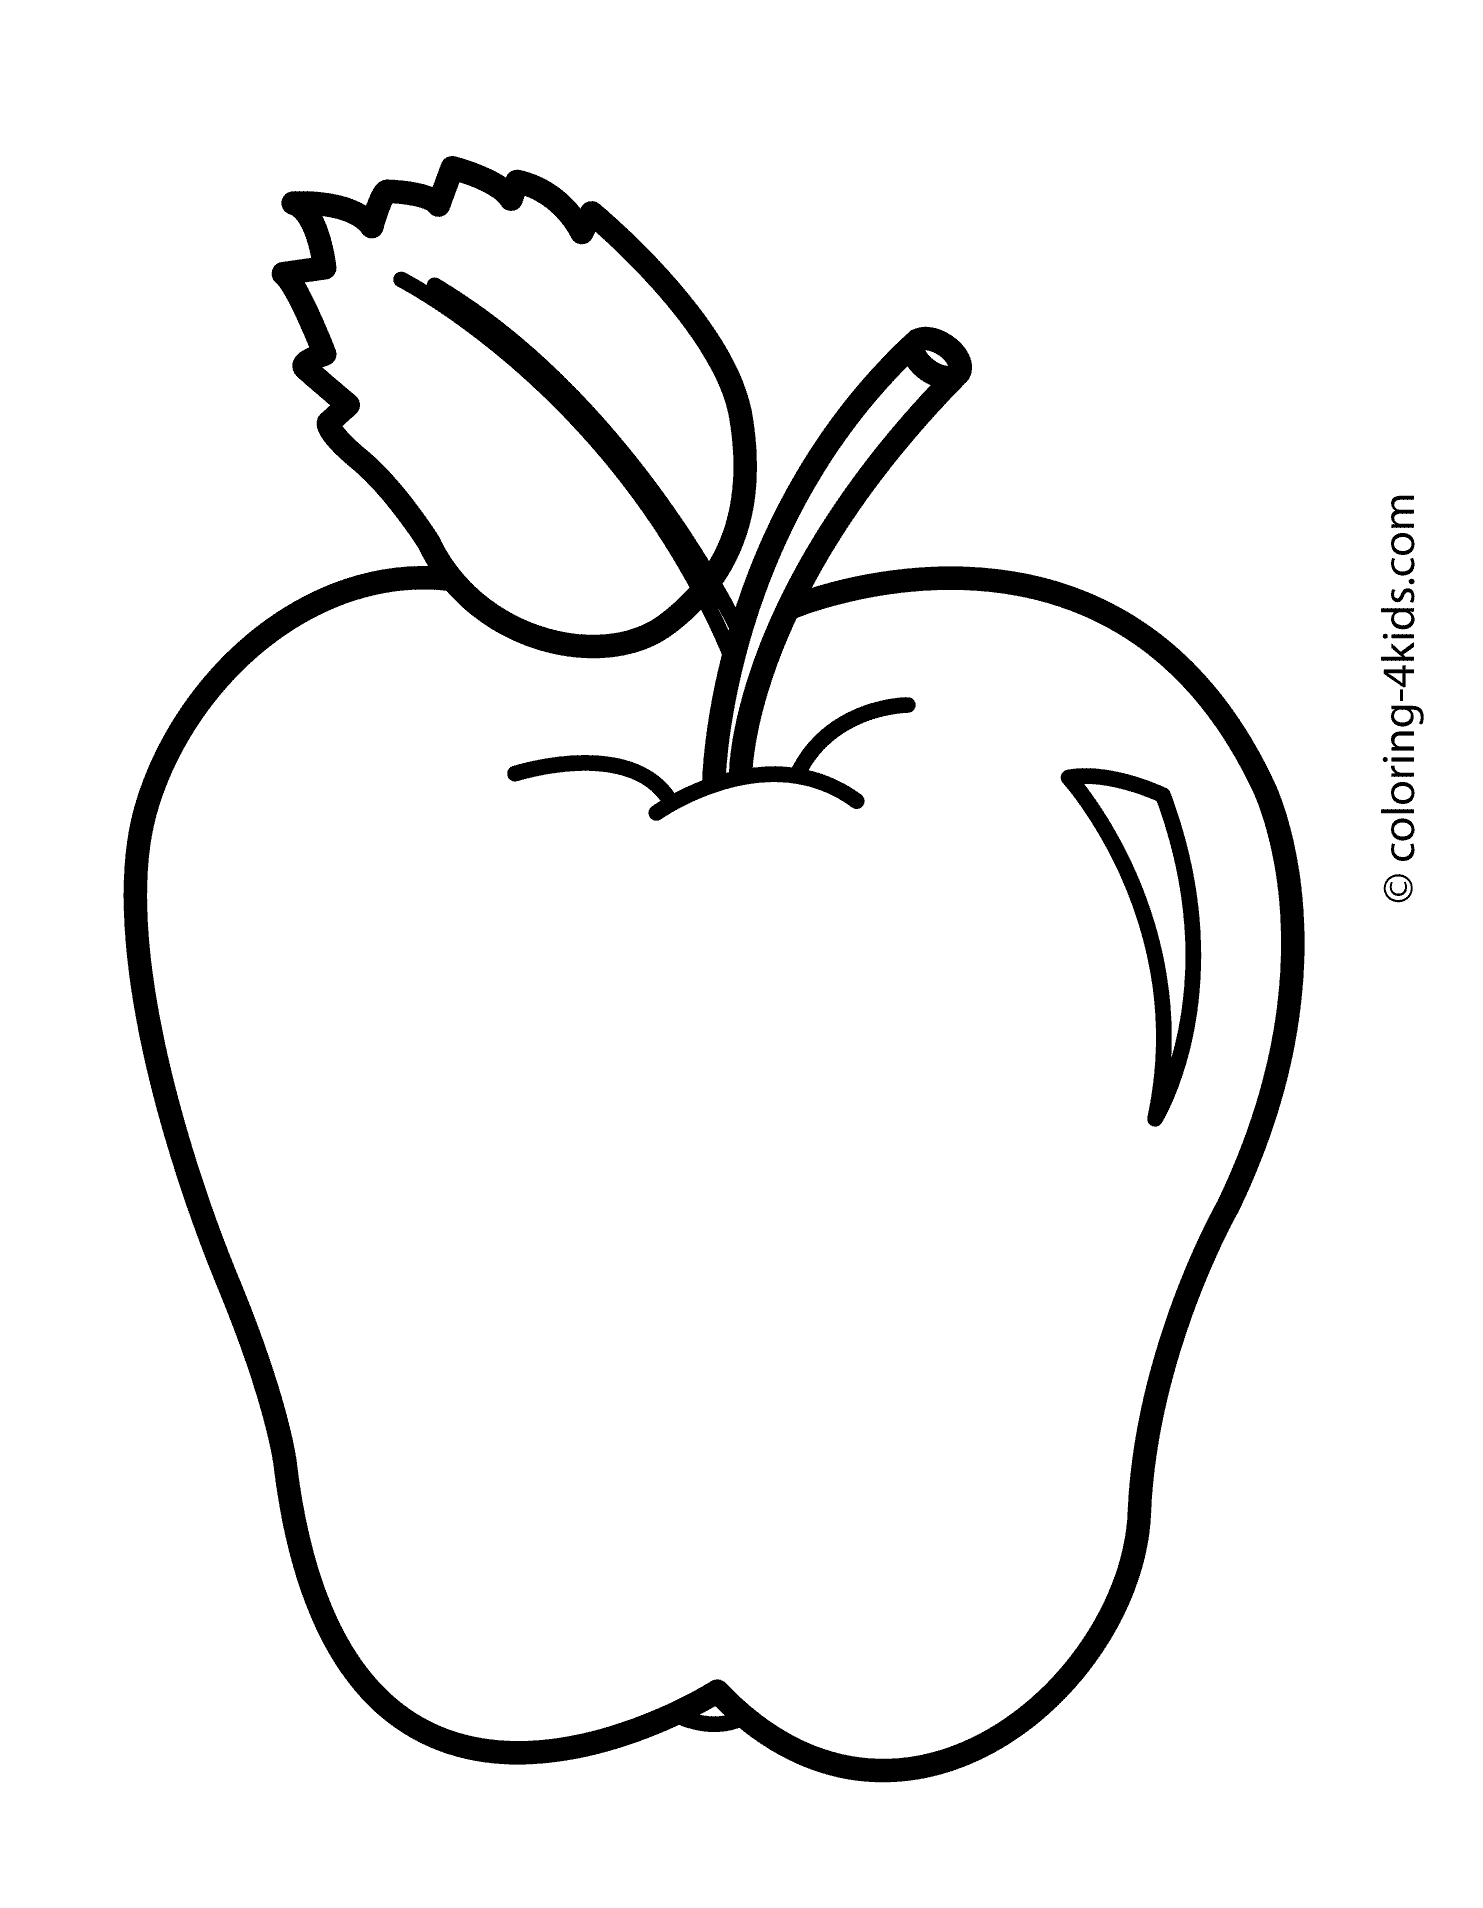 Apple Preschool Coloring Pages - Coloring Pages For All Ages